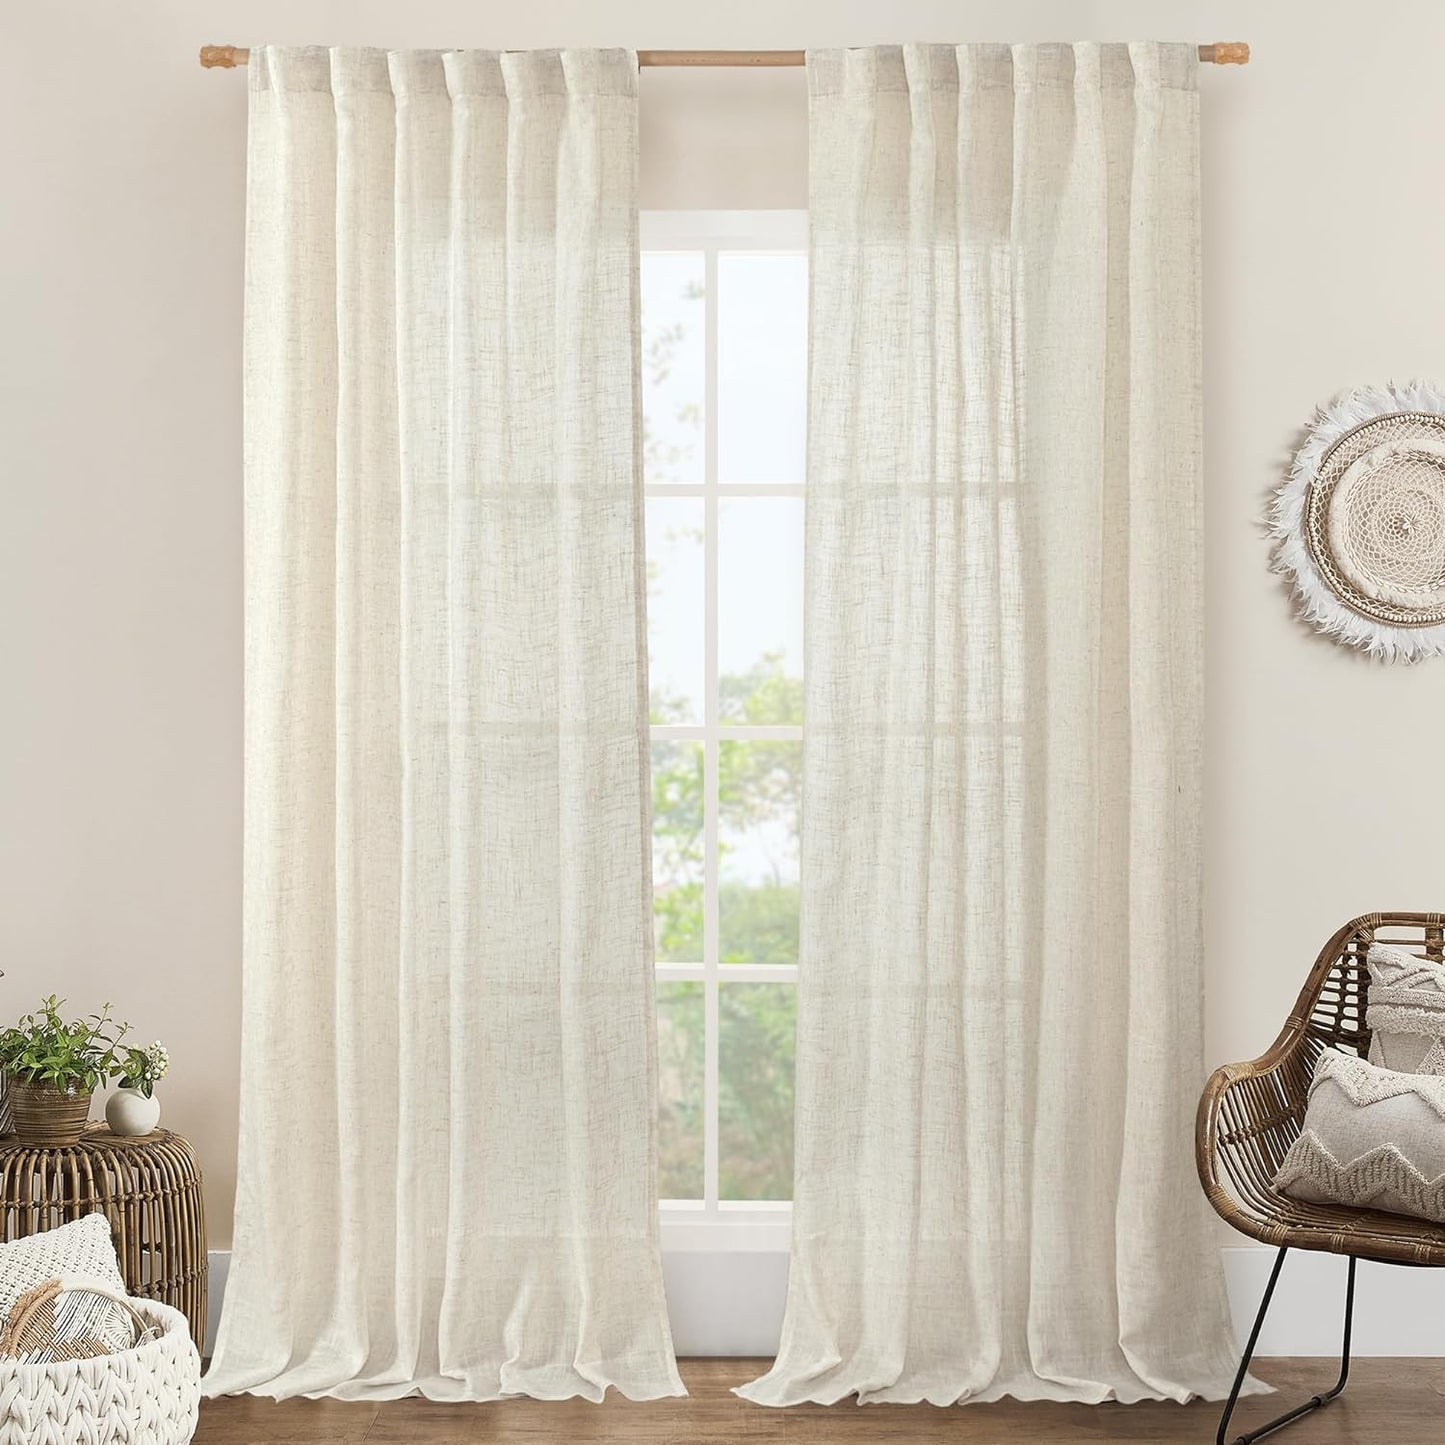 LAMIT Natural Linen Blended Curtains for Living Room, Back Tab and Rod Pocket Semi Sheer Curtains Light Filtering Country Rustic Drapes for Bedroom/Farmhouse, 2 Panels,52 X 108 Inch, Linen  LAMIT Natural 52W X 102L 